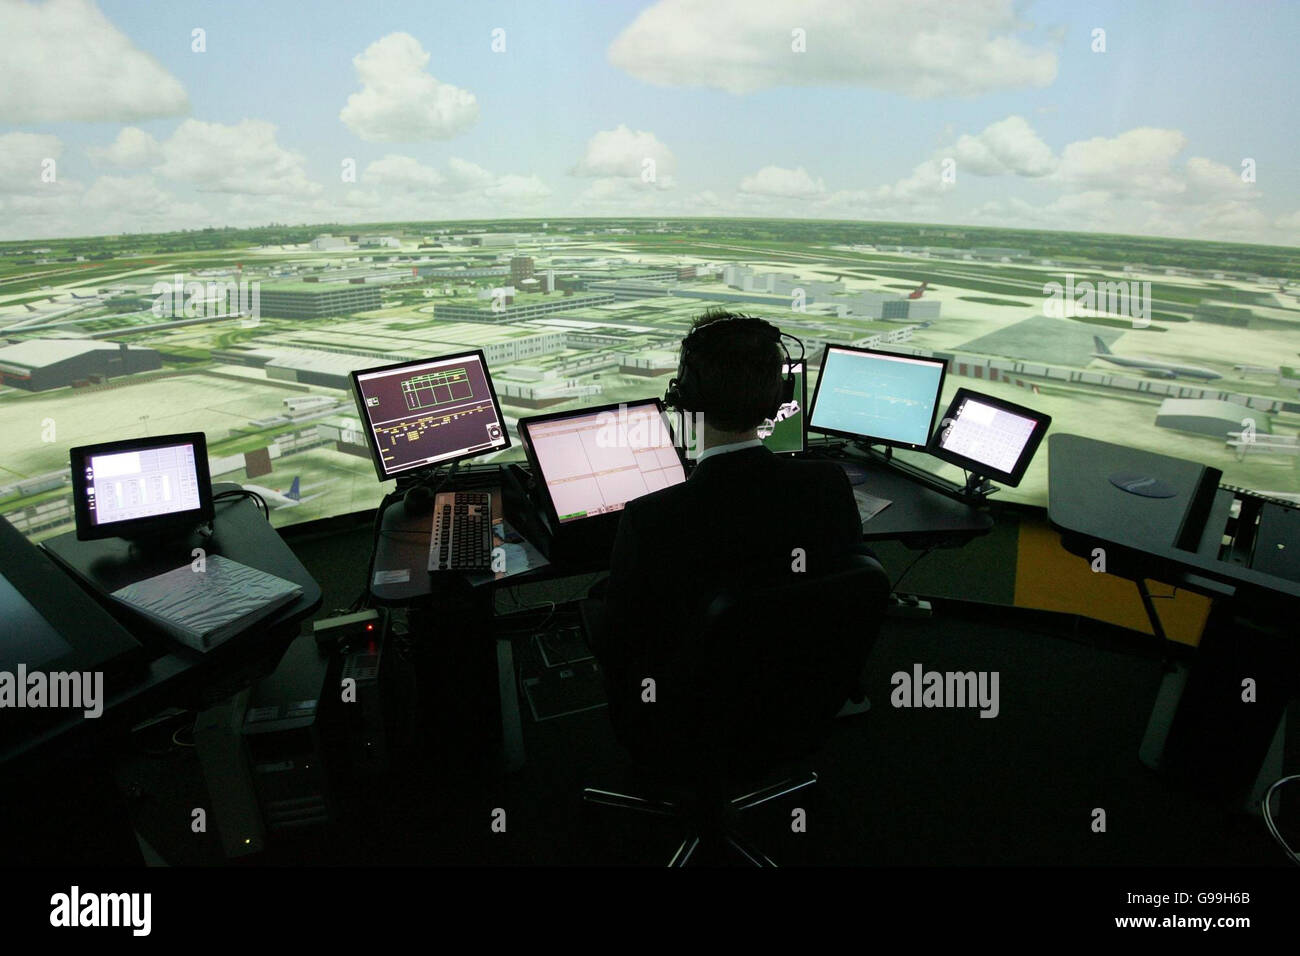 Dale Reeson, an Air Traffic Controller sits in the new 360 degree Heathrow Control Tower Simulator in the Air Traffic Control Tower at Heathrow Airport. Stock Photo